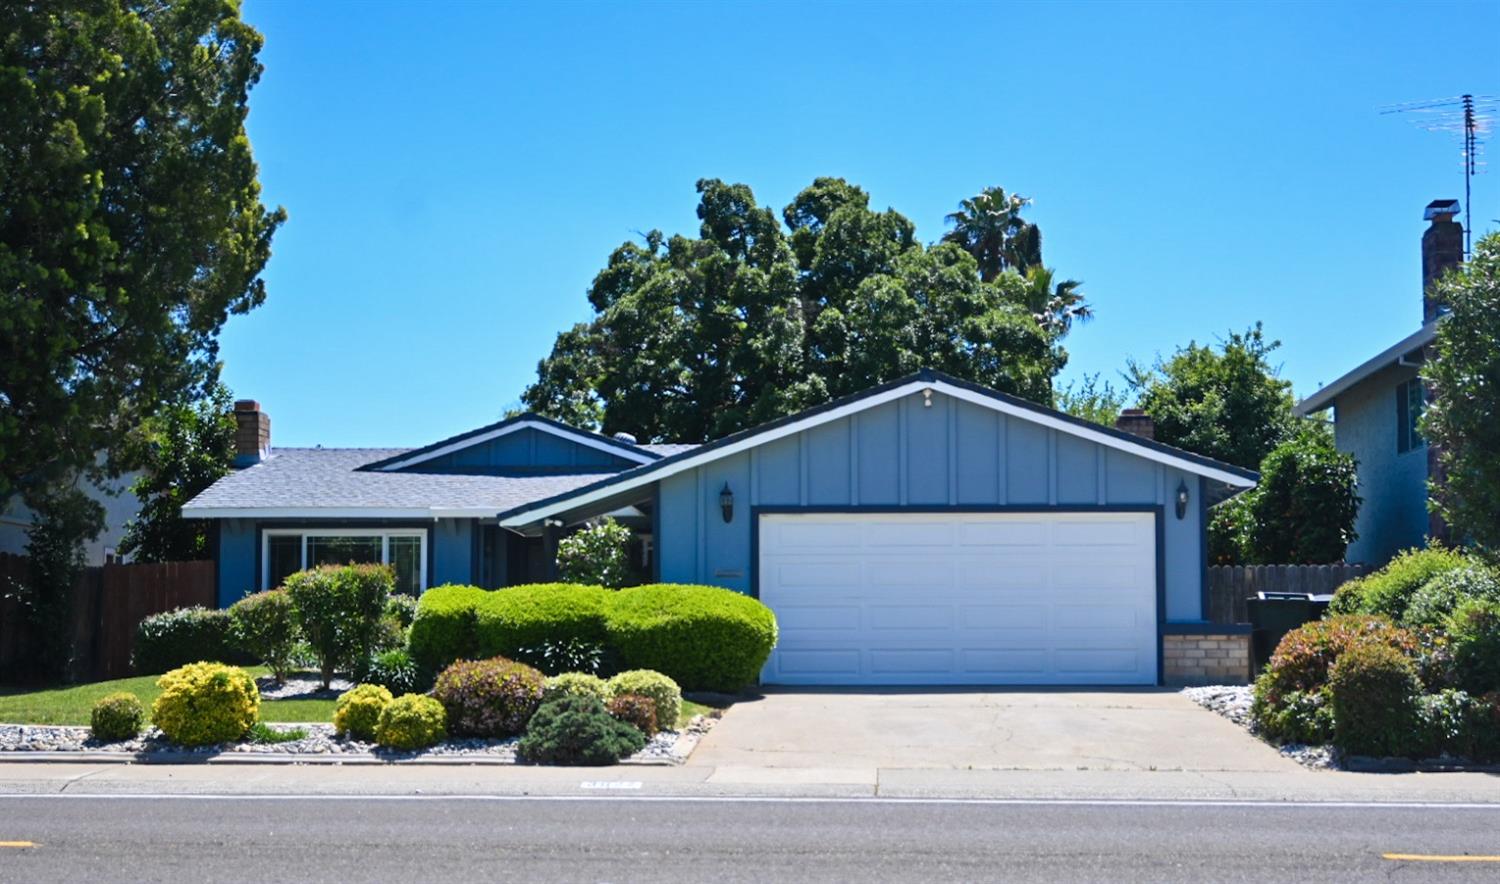 Photo of 3027 Rosemont Dr in Sacramento, CA